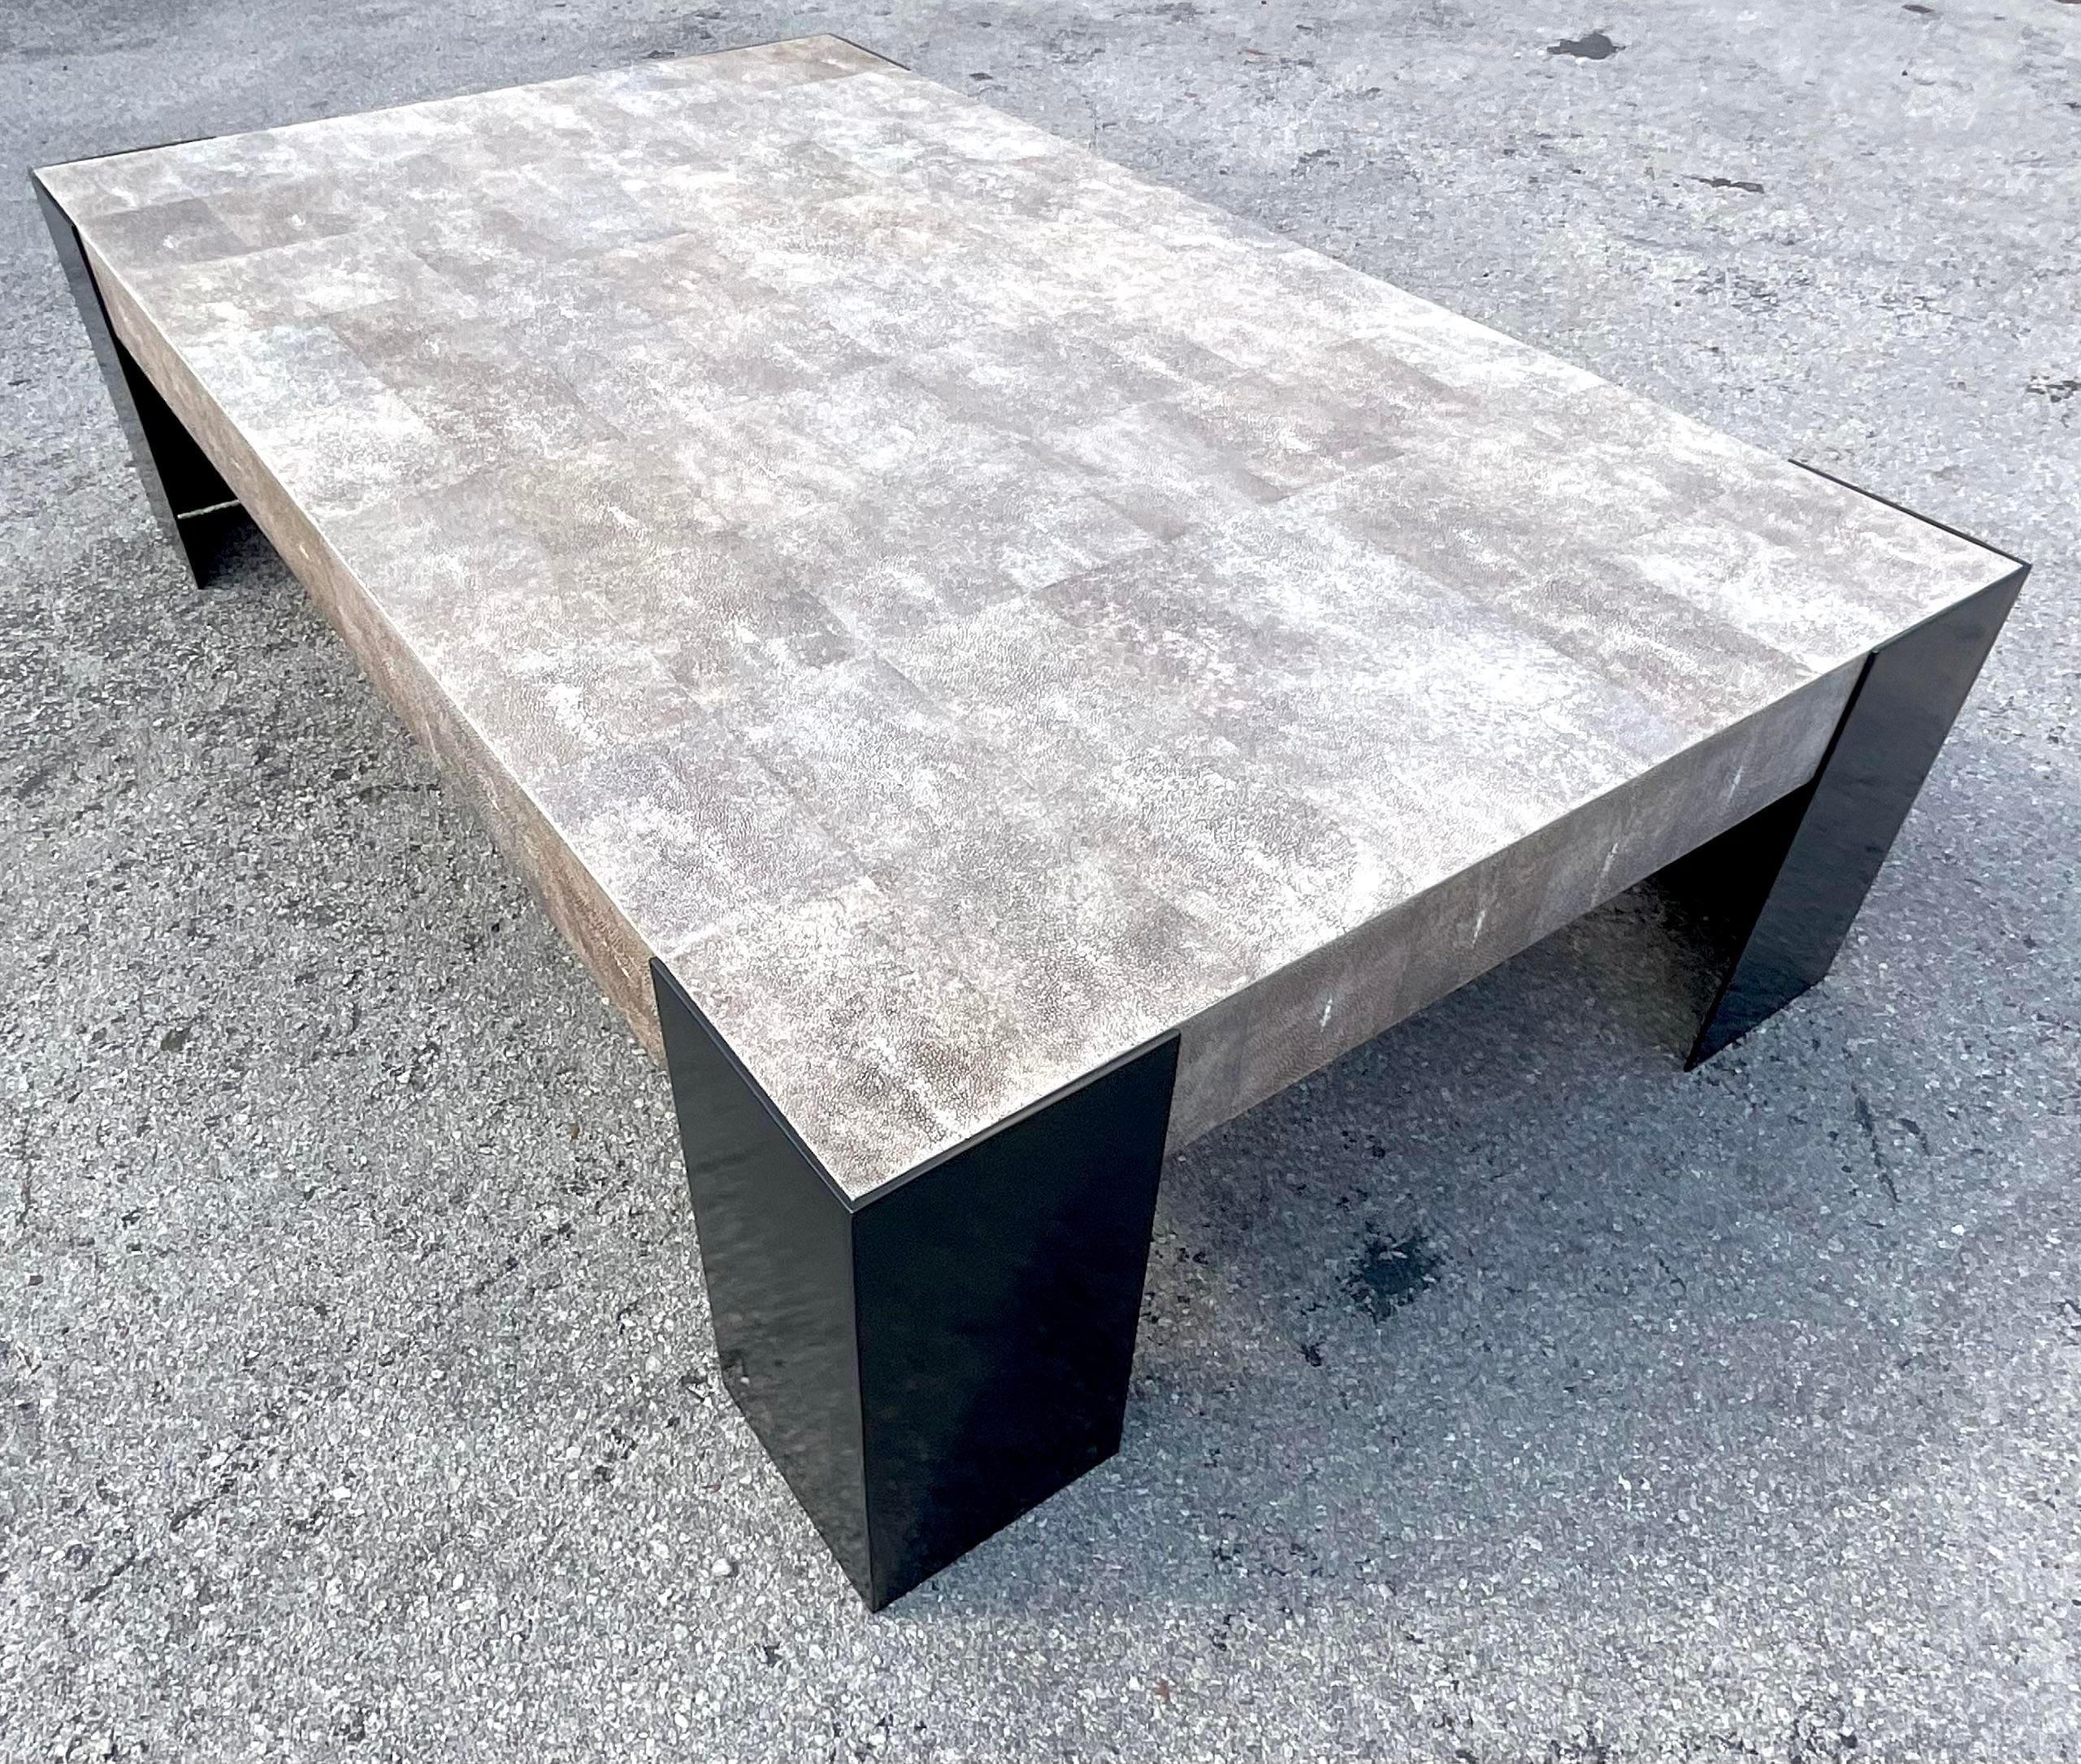 An extraordinary vintage contemporary coffee table. Chic wrapped Stingray frame with patinated steel legs. An impeccably made piece of furniture. Made by the iconic Alexander Lamont and signed on the bottom. Acquired from a Palm Beach estate.